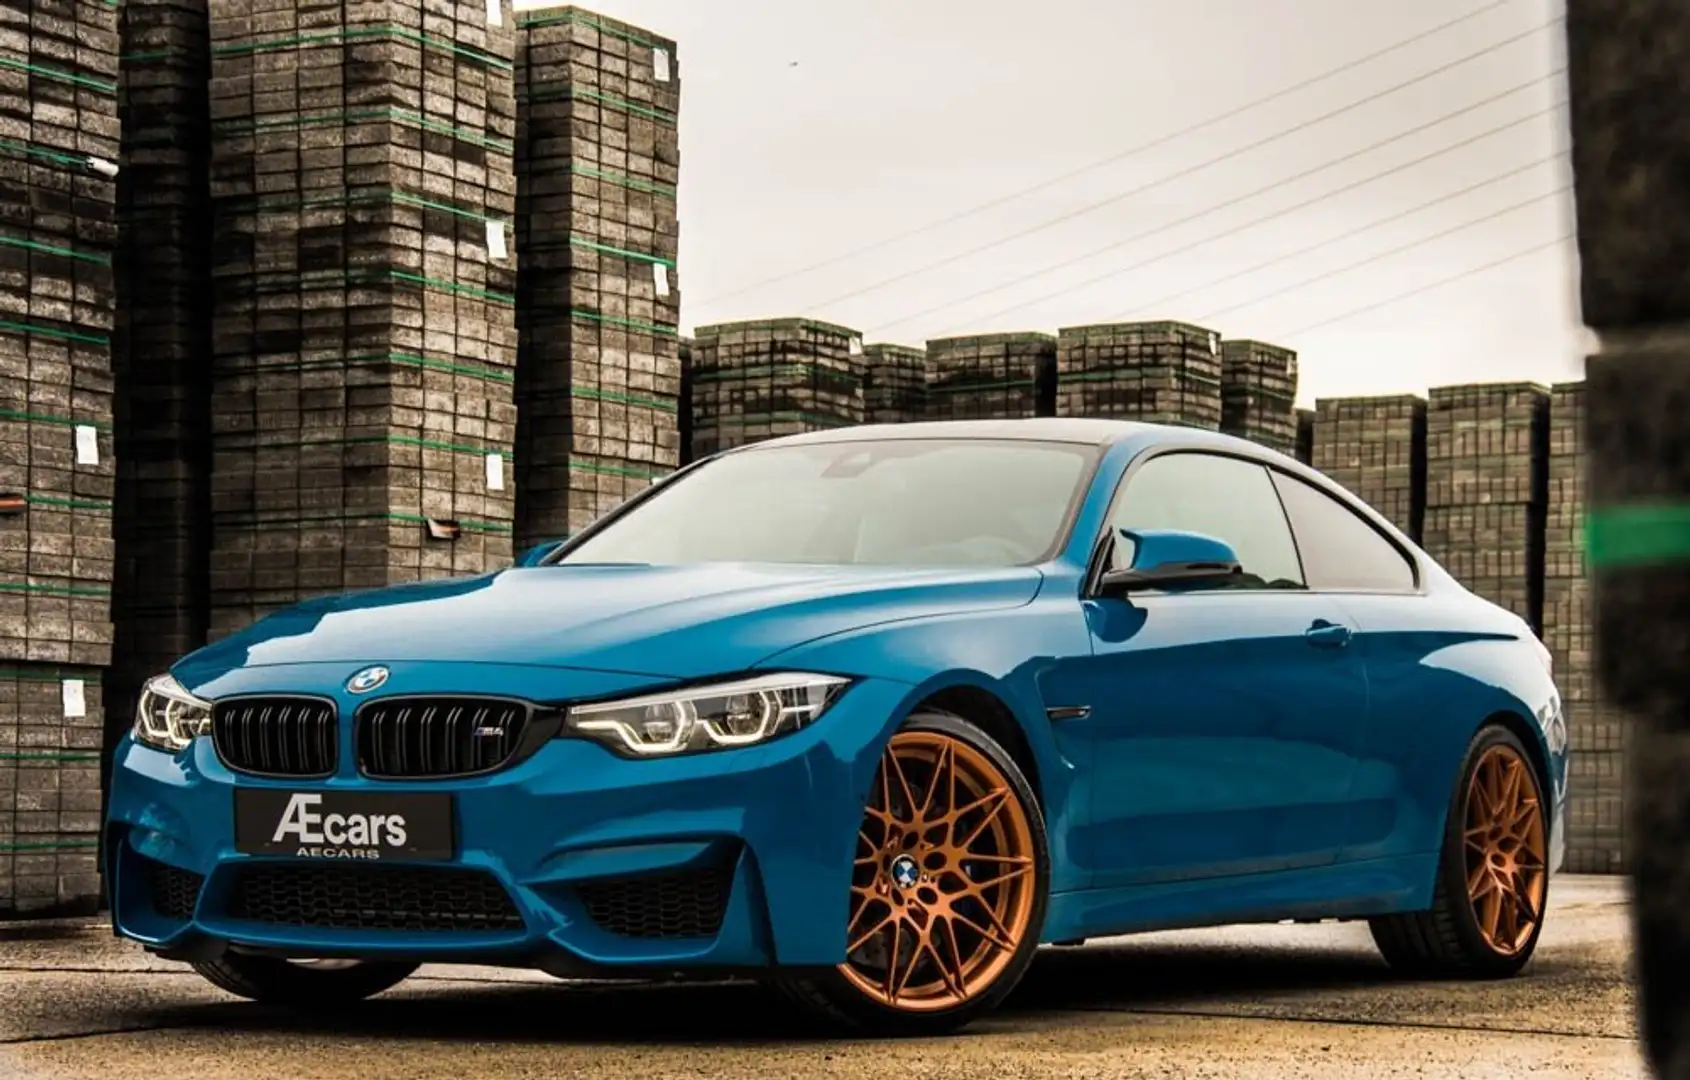 BMW M4 *** COMPETITION HERITAGE / LIMITED 1 OF 750 *** Blue - 1